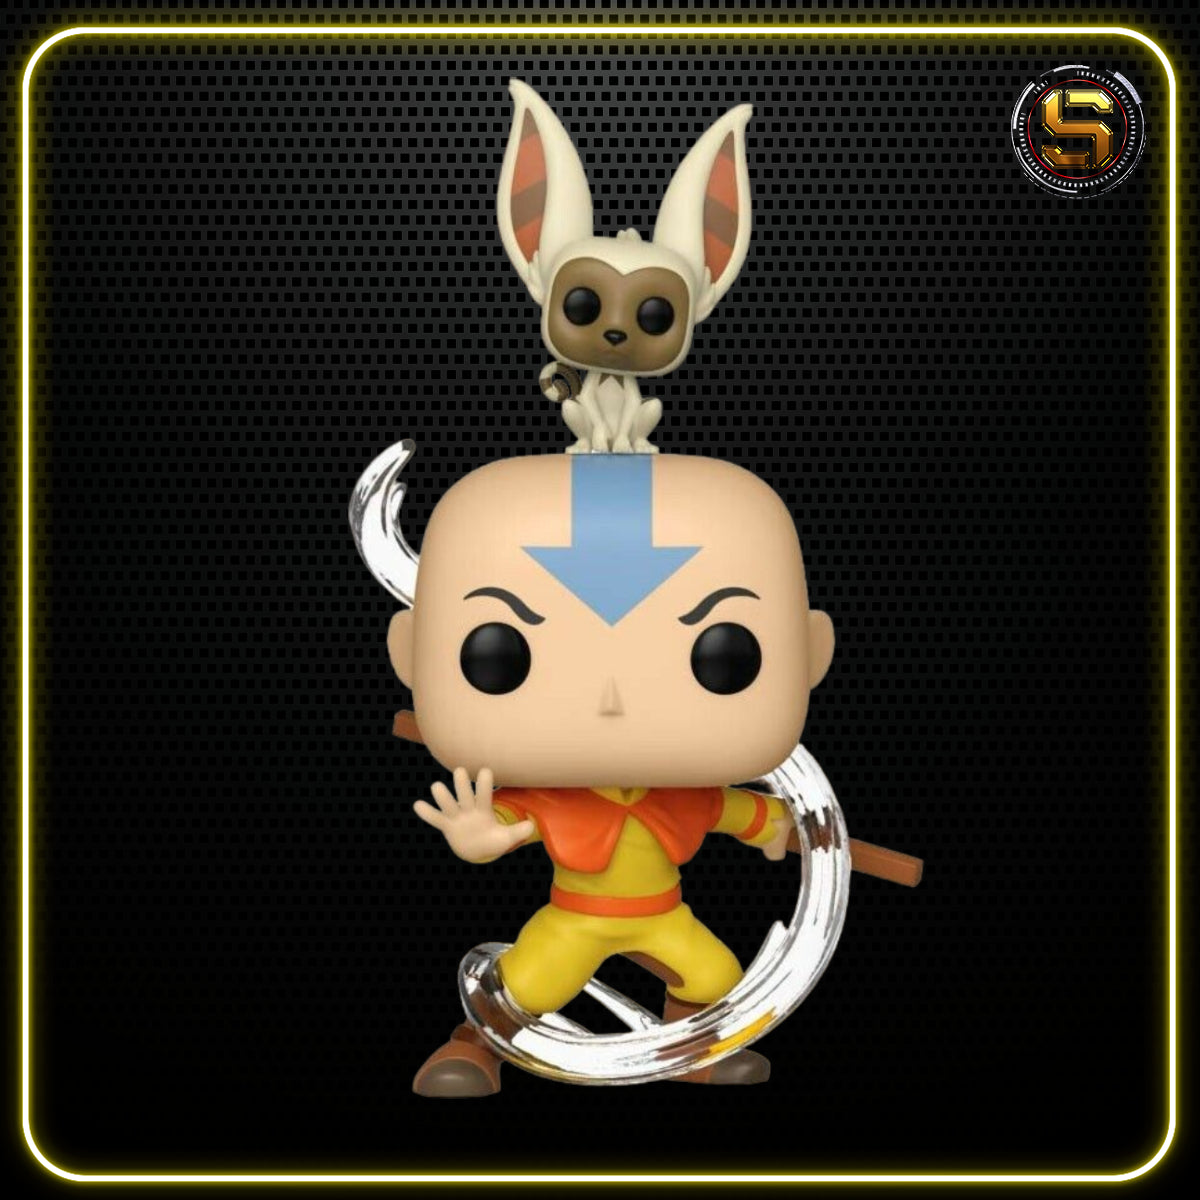 FUNKO POP ANIMATION AVATAR THE LAST AIRBENDER AANG WITH MOMO 534